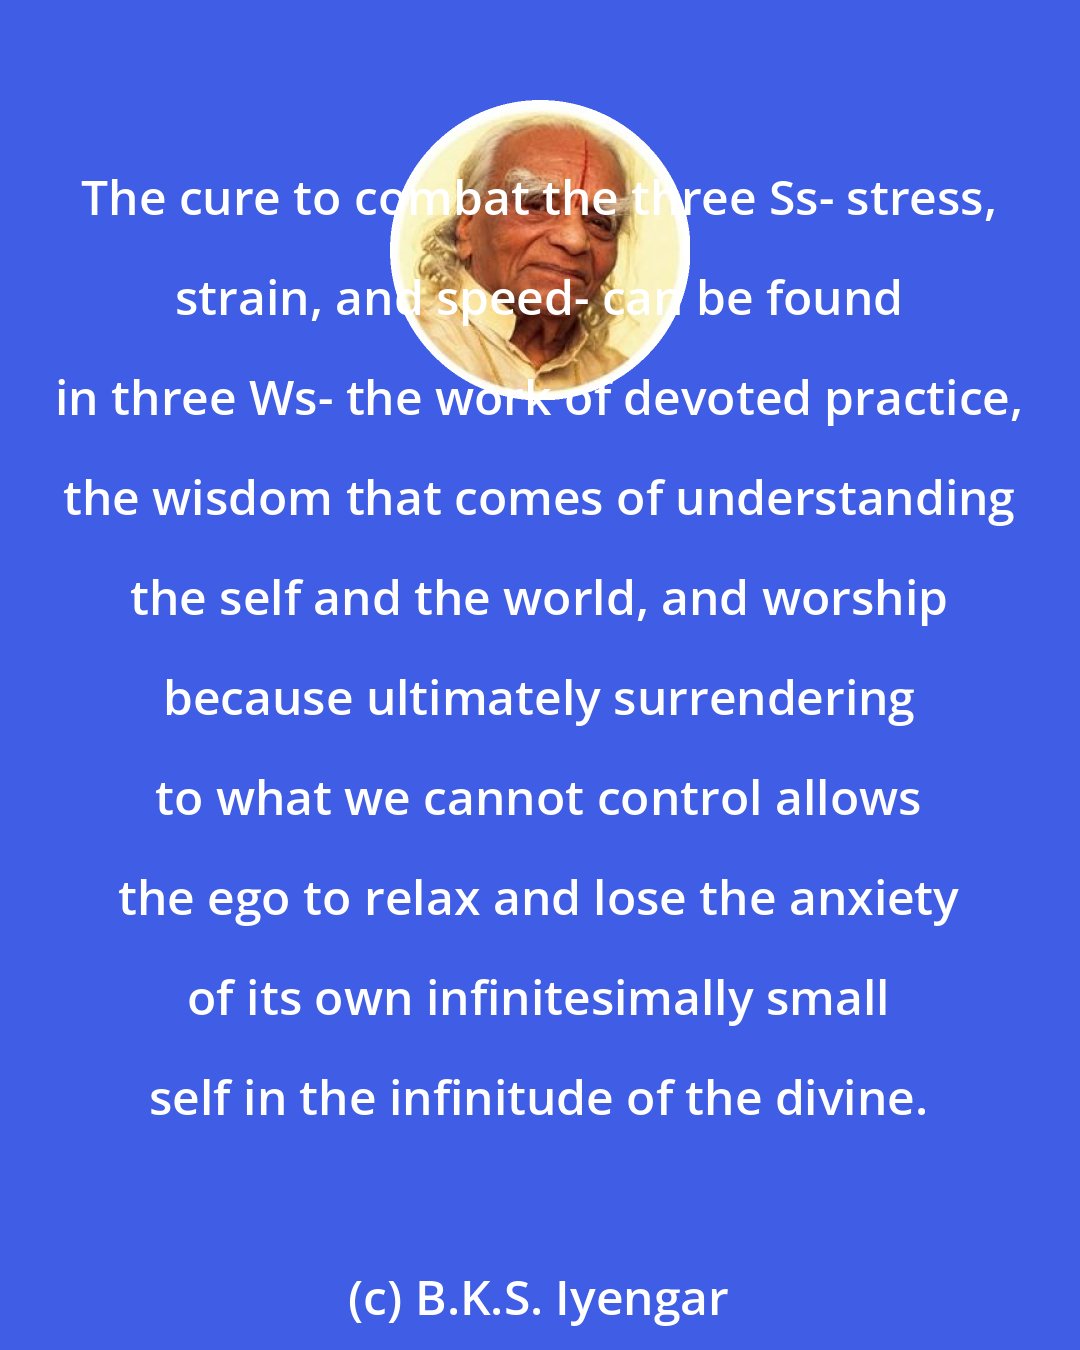 B.K.S. Iyengar: The cure to combat the three Ss- stress, strain, and speed- can be found in three Ws- the work of devoted practice, the wisdom that comes of understanding the self and the world, and worship because ultimately surrendering to what we cannot control allows the ego to relax and lose the anxiety of its own infinitesimally small self in the infinitude of the divine.